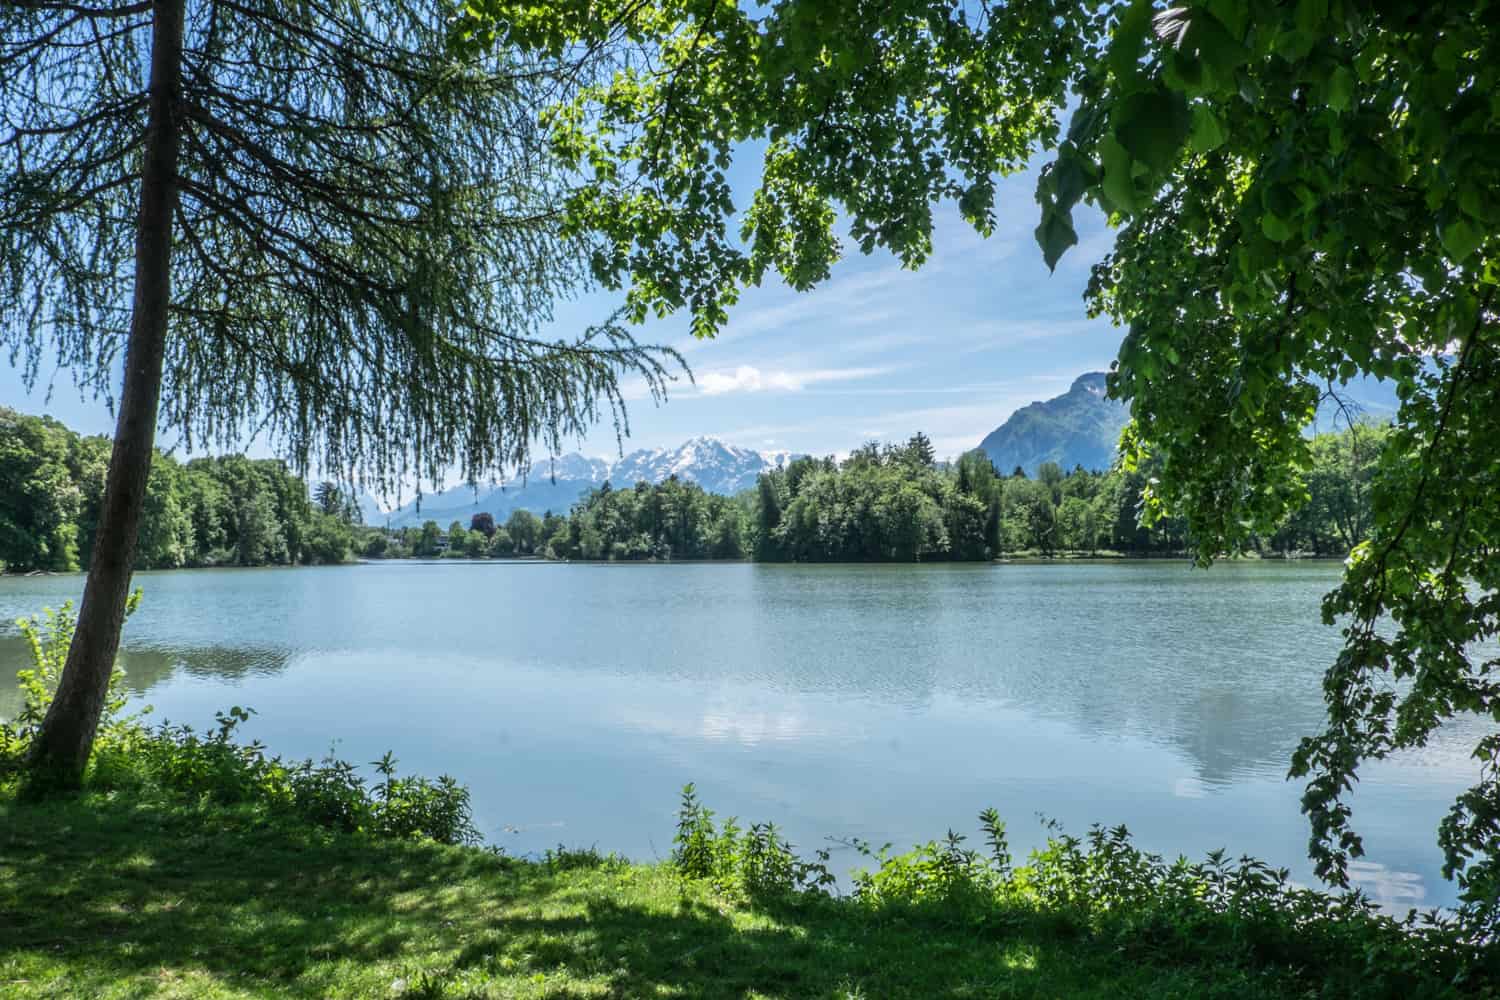 The shimmering blue, mountain backed, tree-lined Sound of Music Lake at Schloss Leopoldskron in Salzburg, Austria.